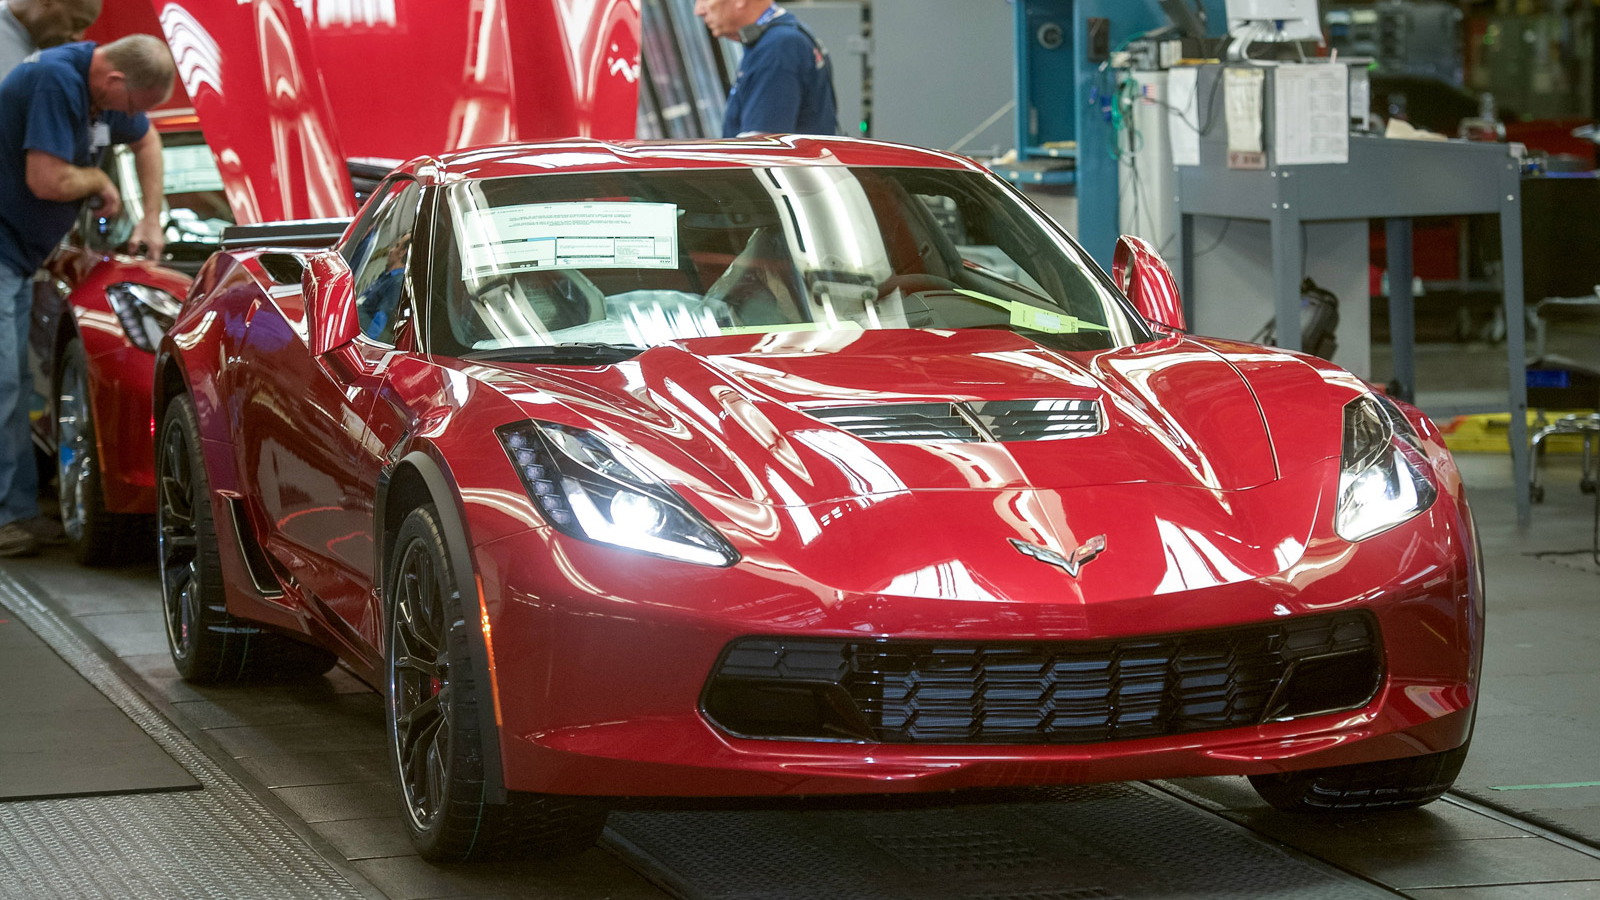 2015 Chevrolet Corvette Z06 being shipped out to dealers